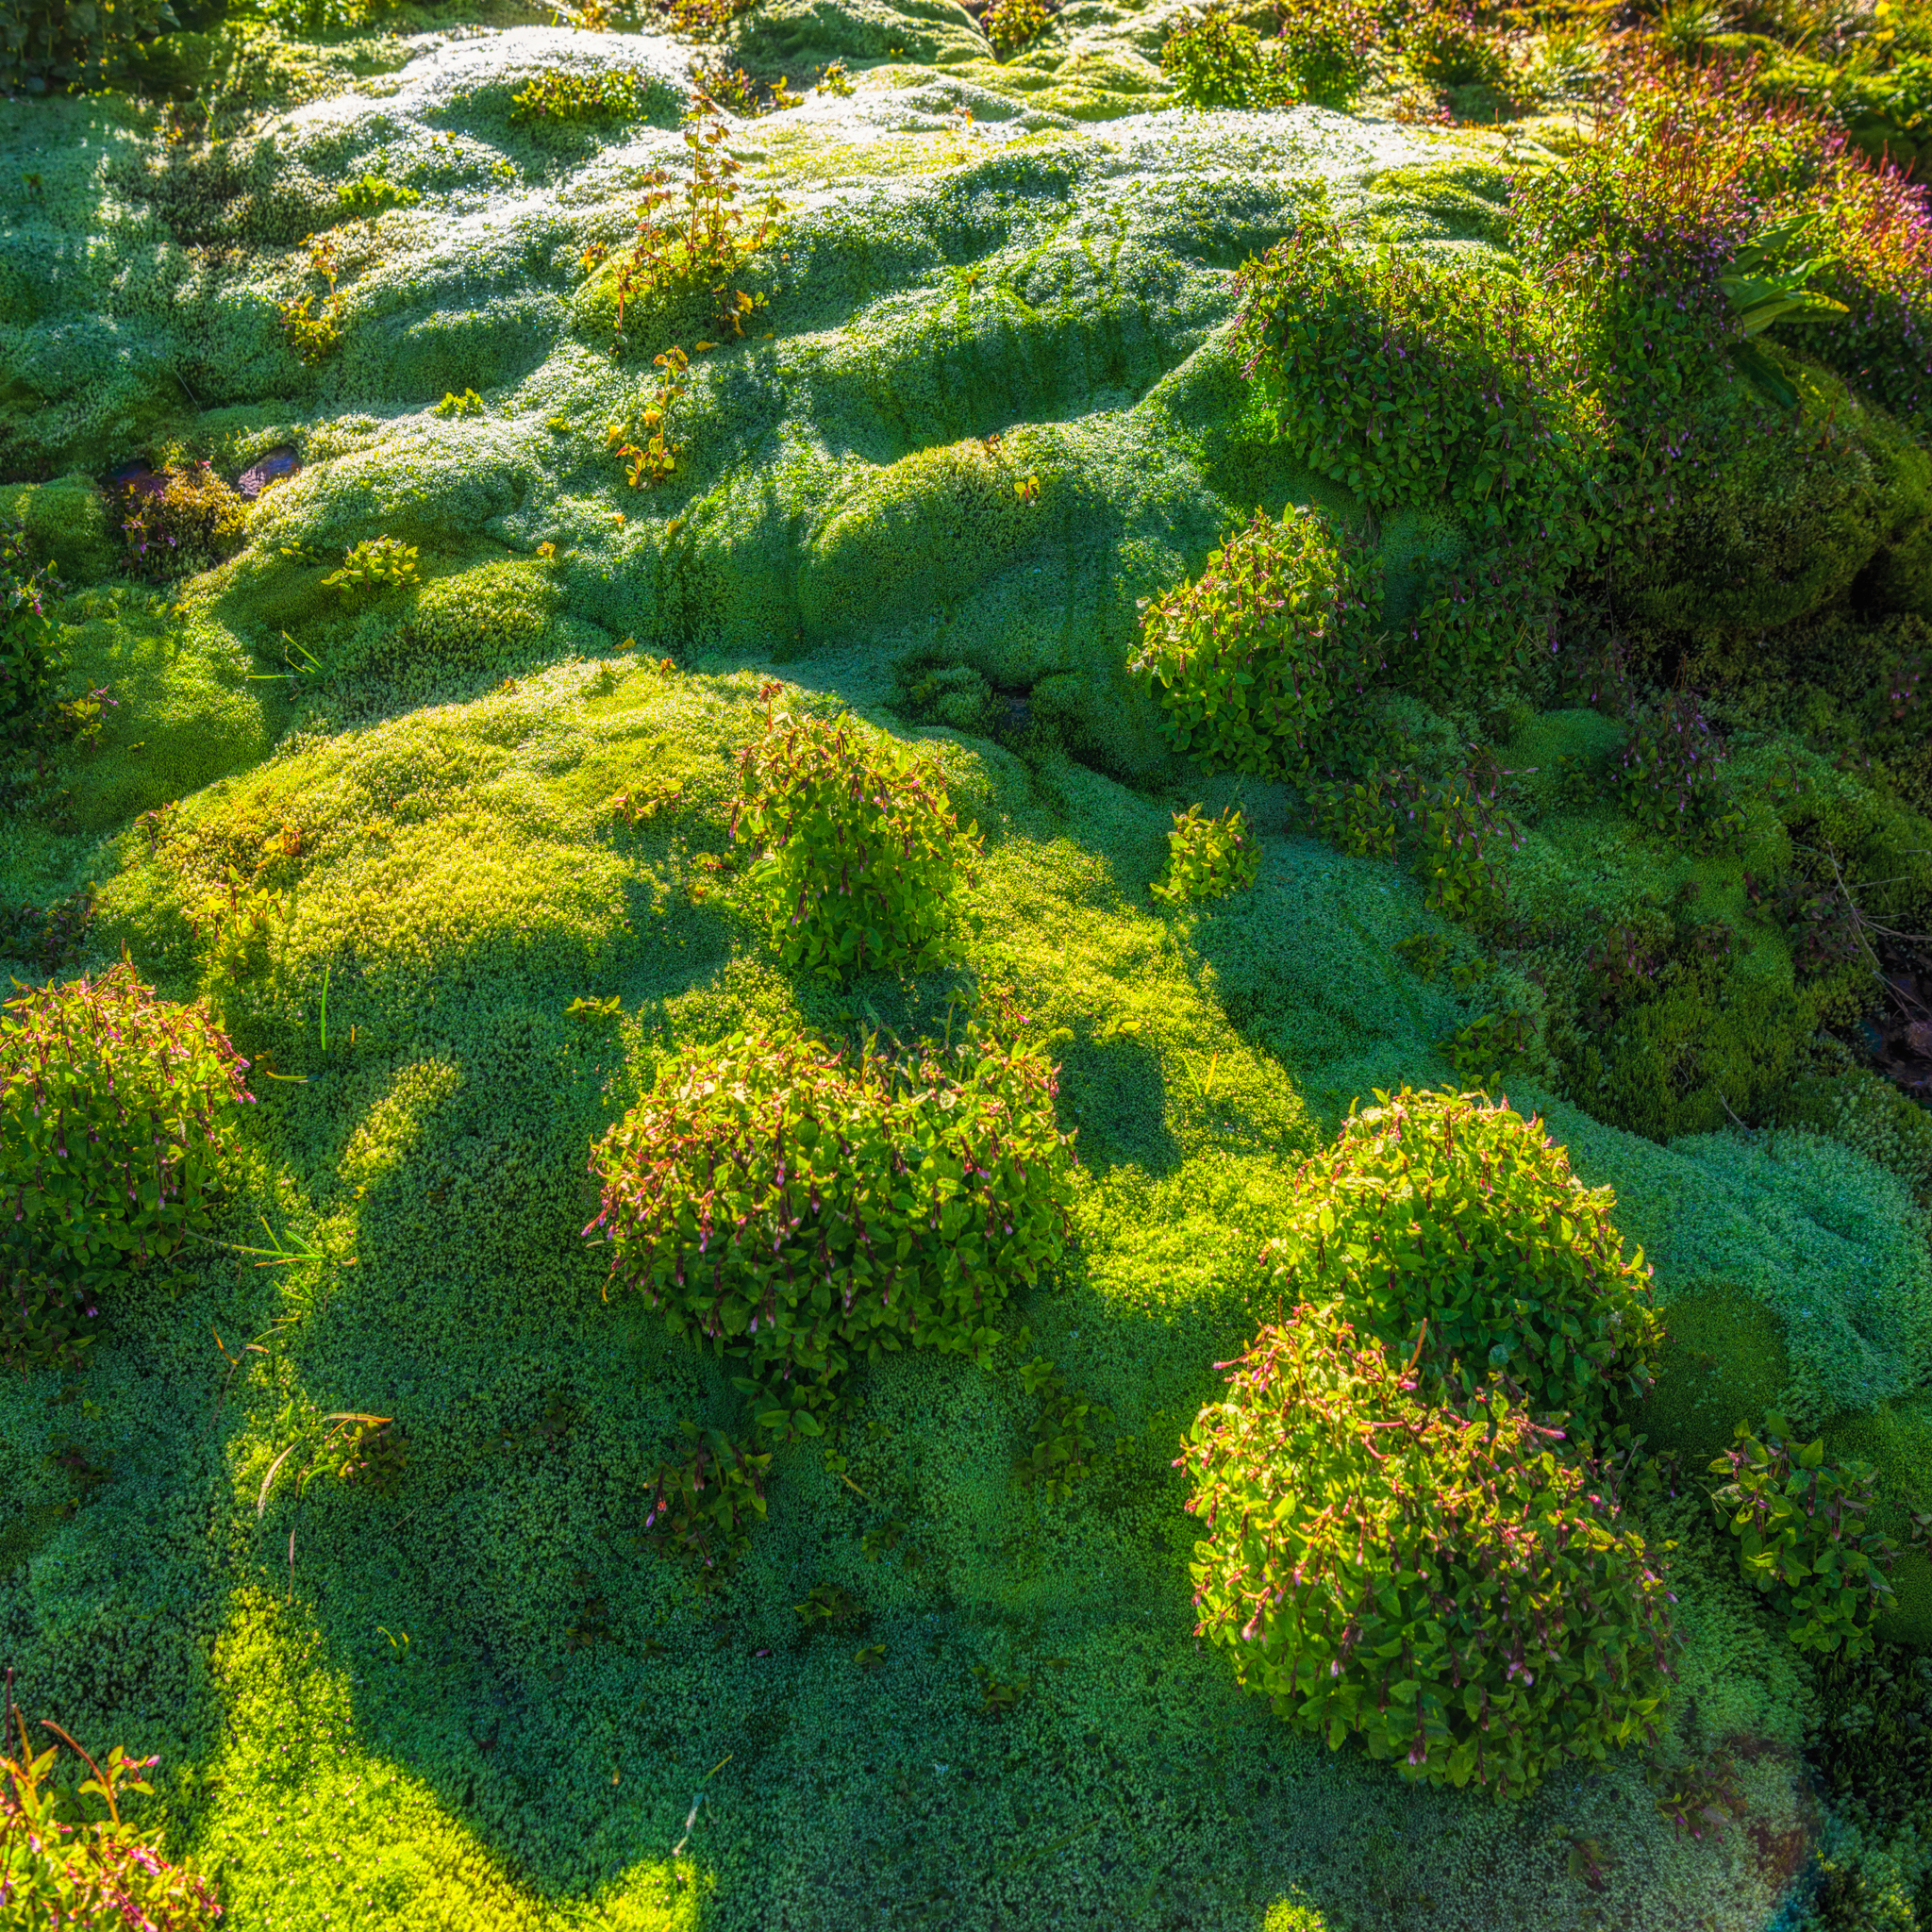 This patch of moss grows arounbd a seep along Stony Pass Road near Silverton, Coilorado.